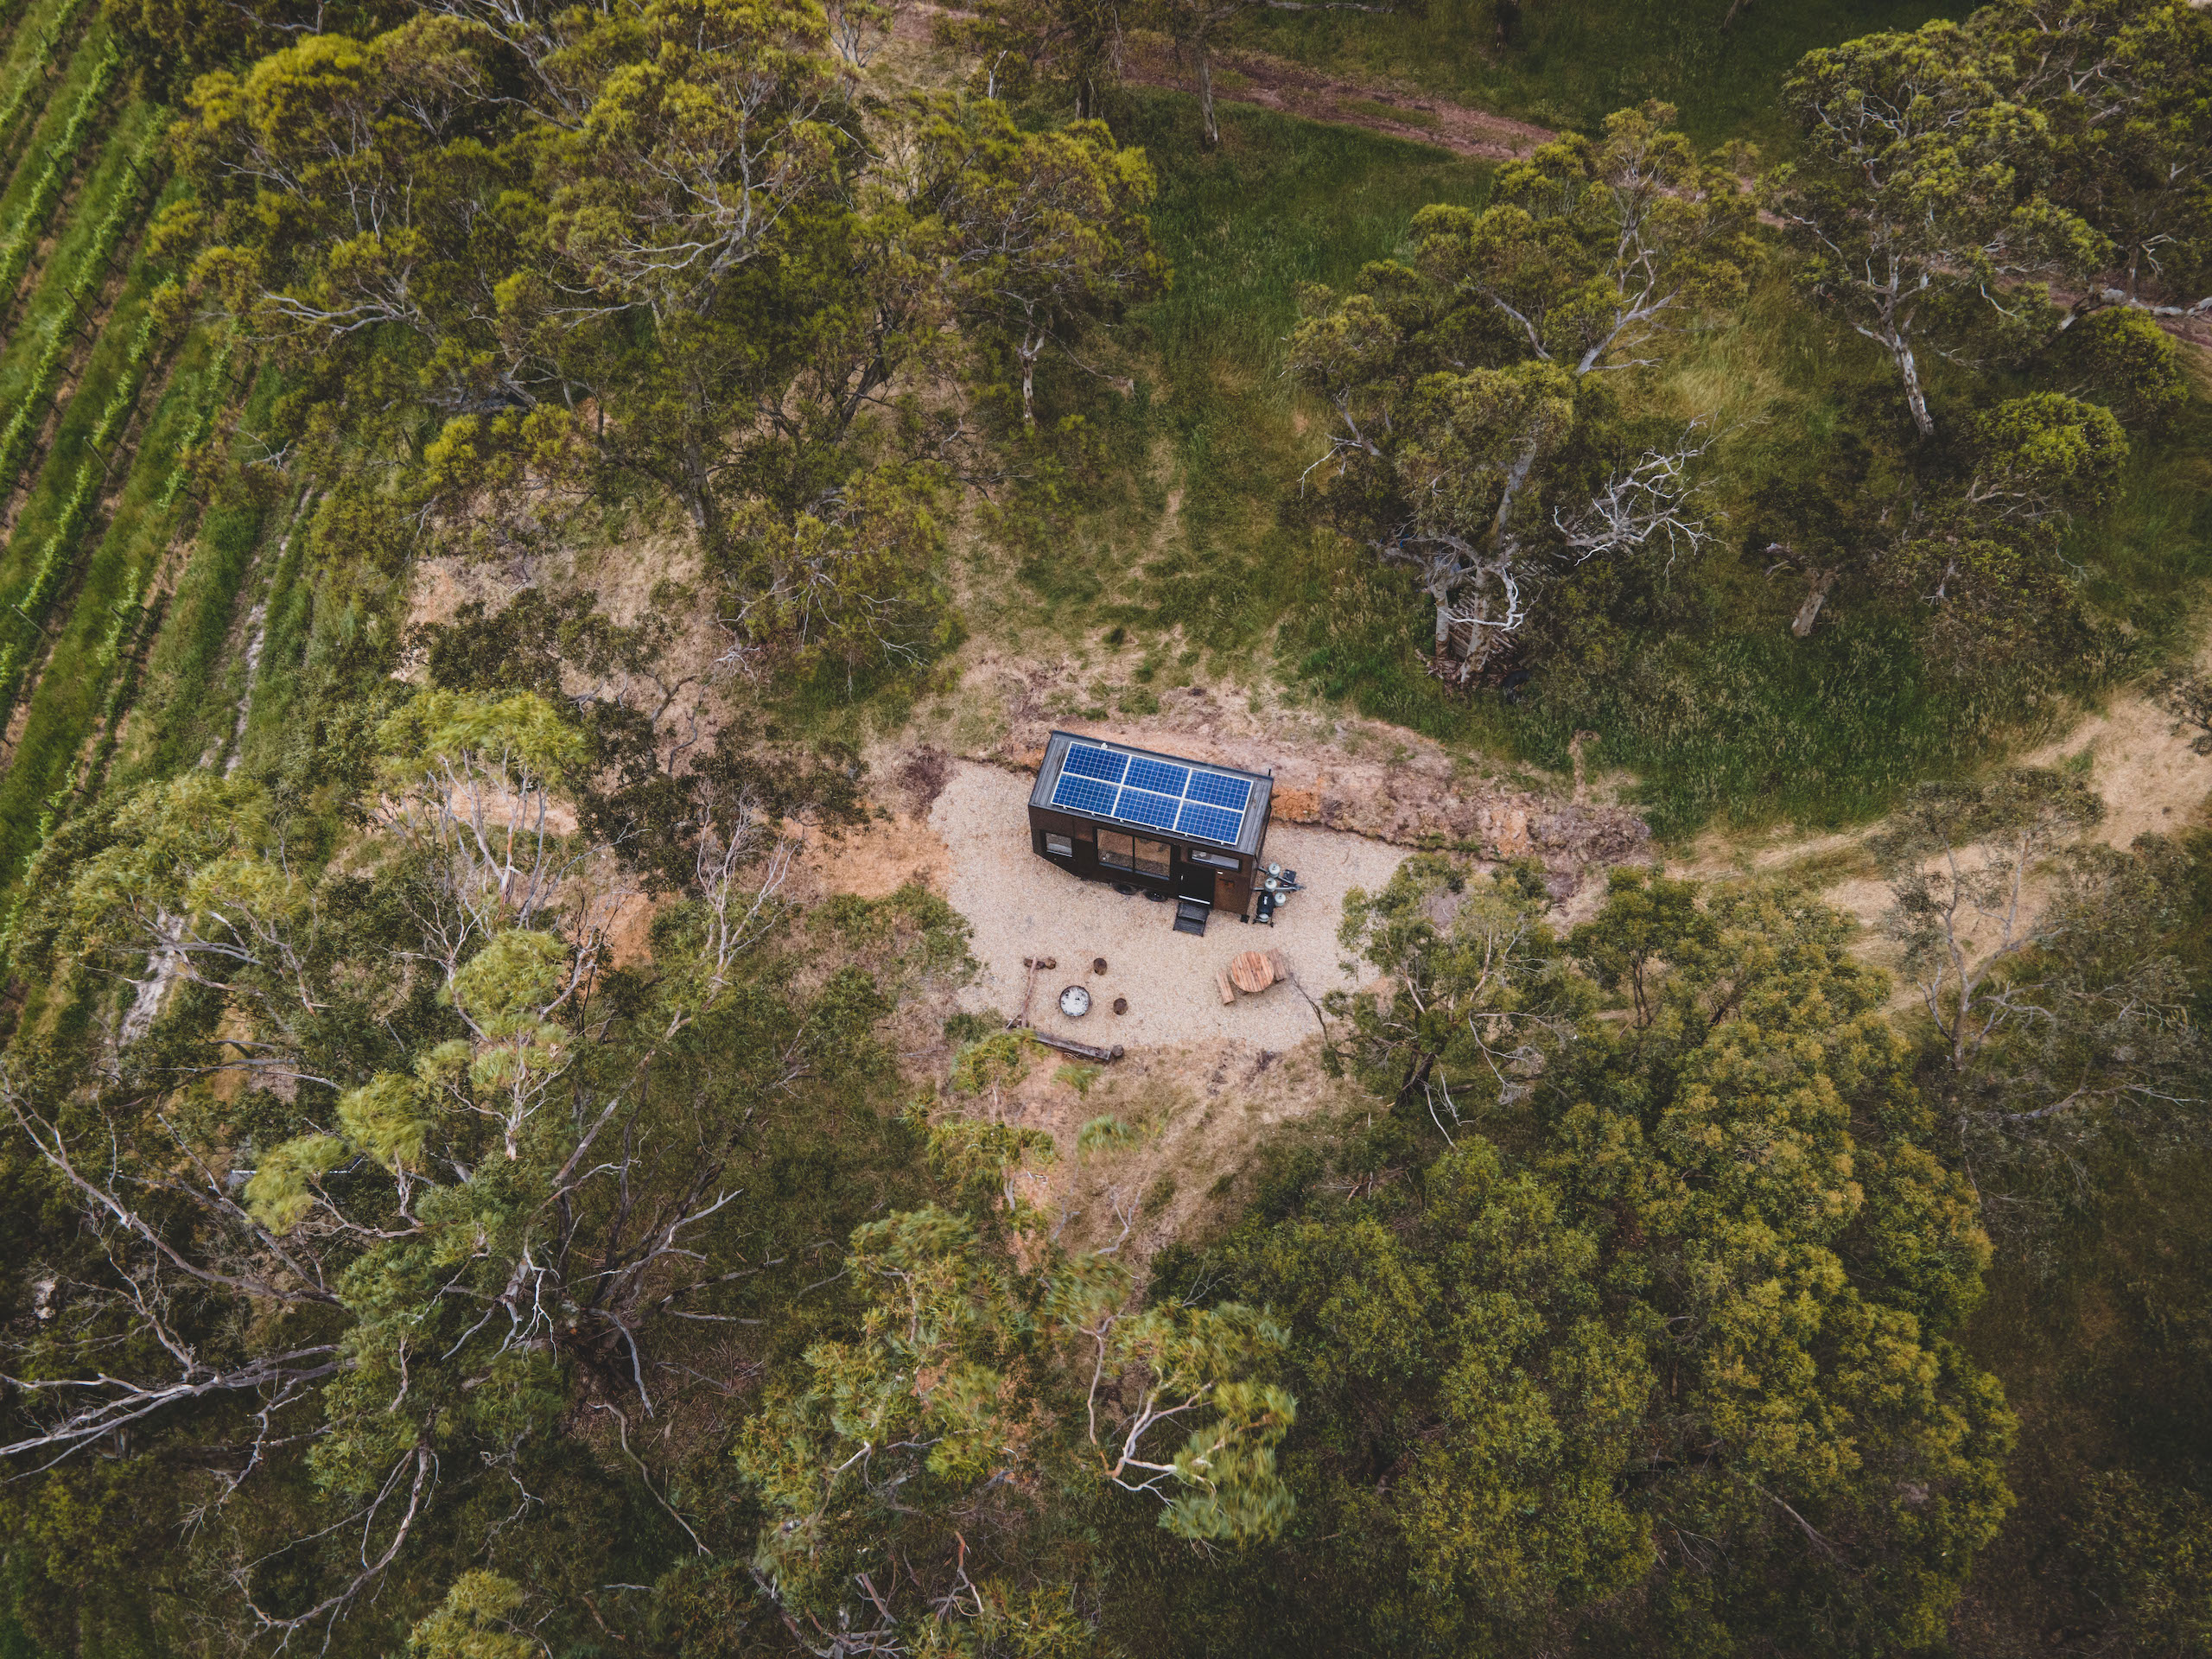 Intrepid Travel Invests $7.85 Million In Cabn To Expand Off Grid Experiences In Australia